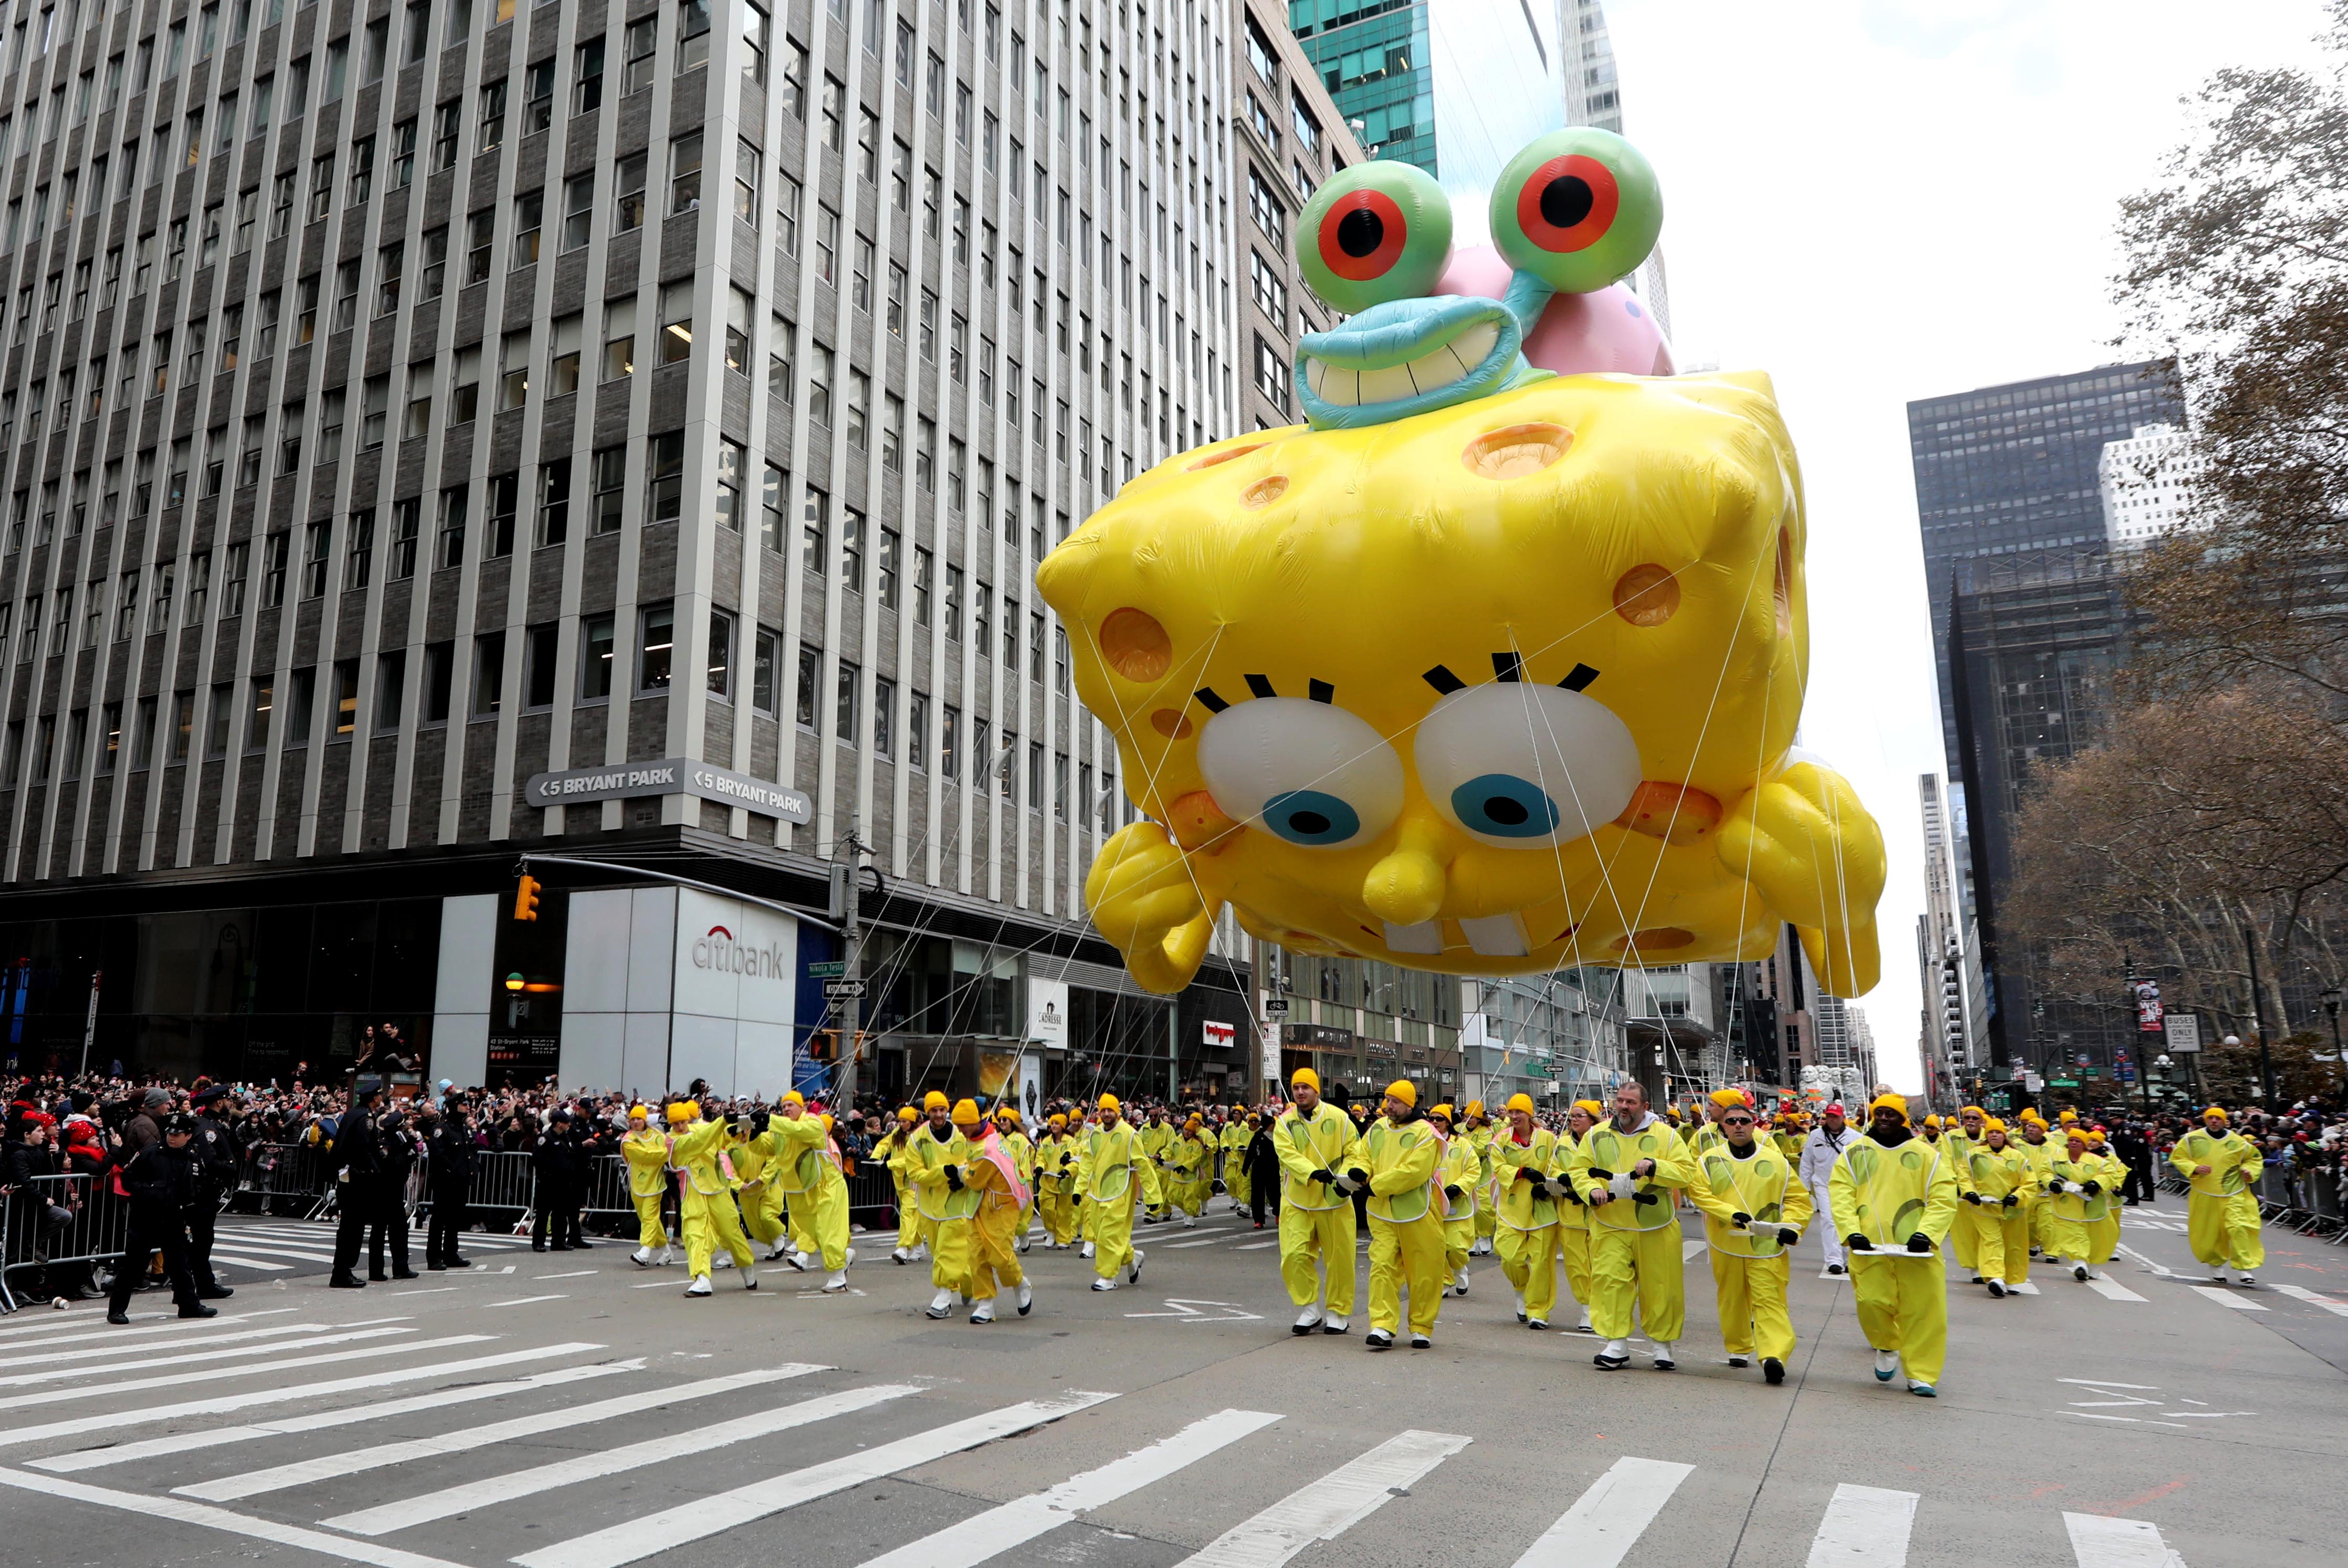 Macy's Thanksgiving Day Parade will be different in 2020 due to COVID